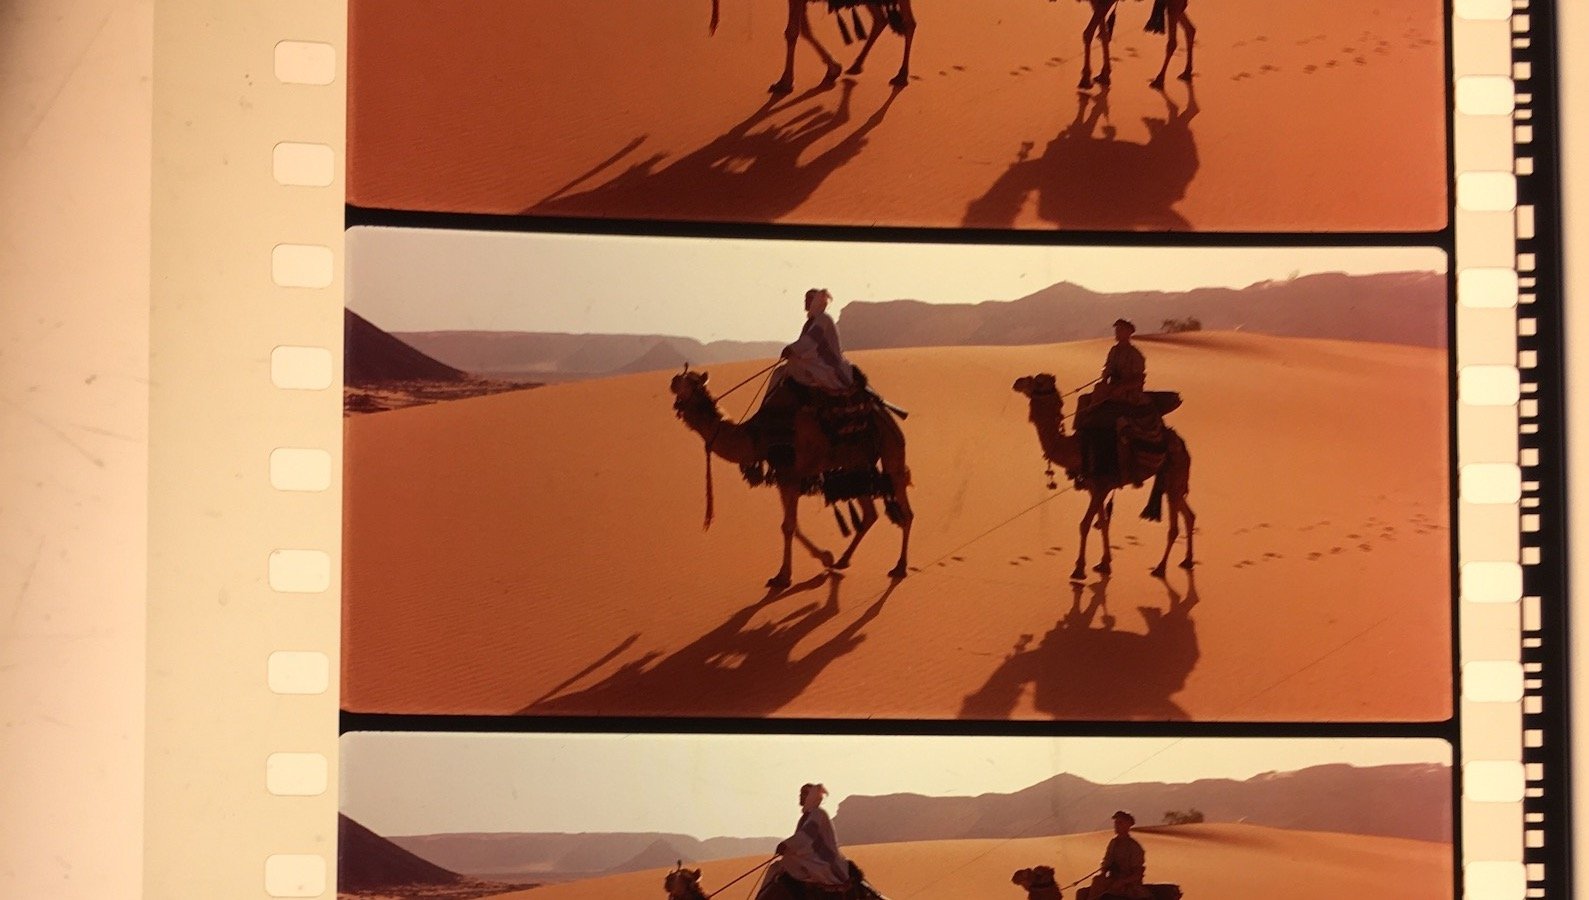 A close-up of a 70mm film strip, showing camels silhouetted against a desert from Lawrence of Arabia